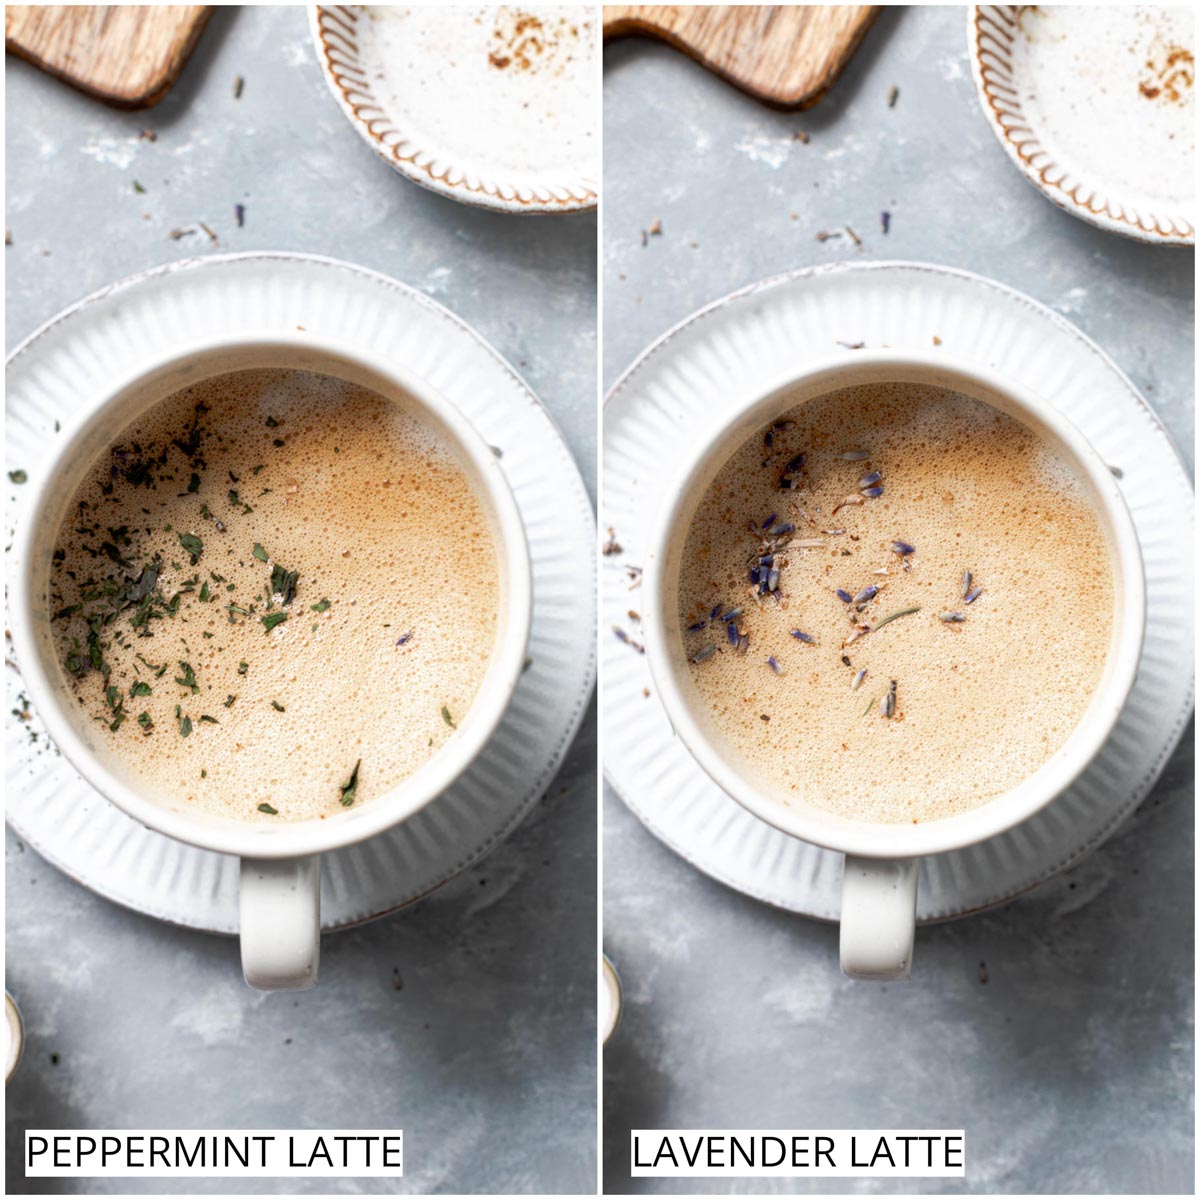 A collage of two images next to each other showing peppermint and lavender latte.